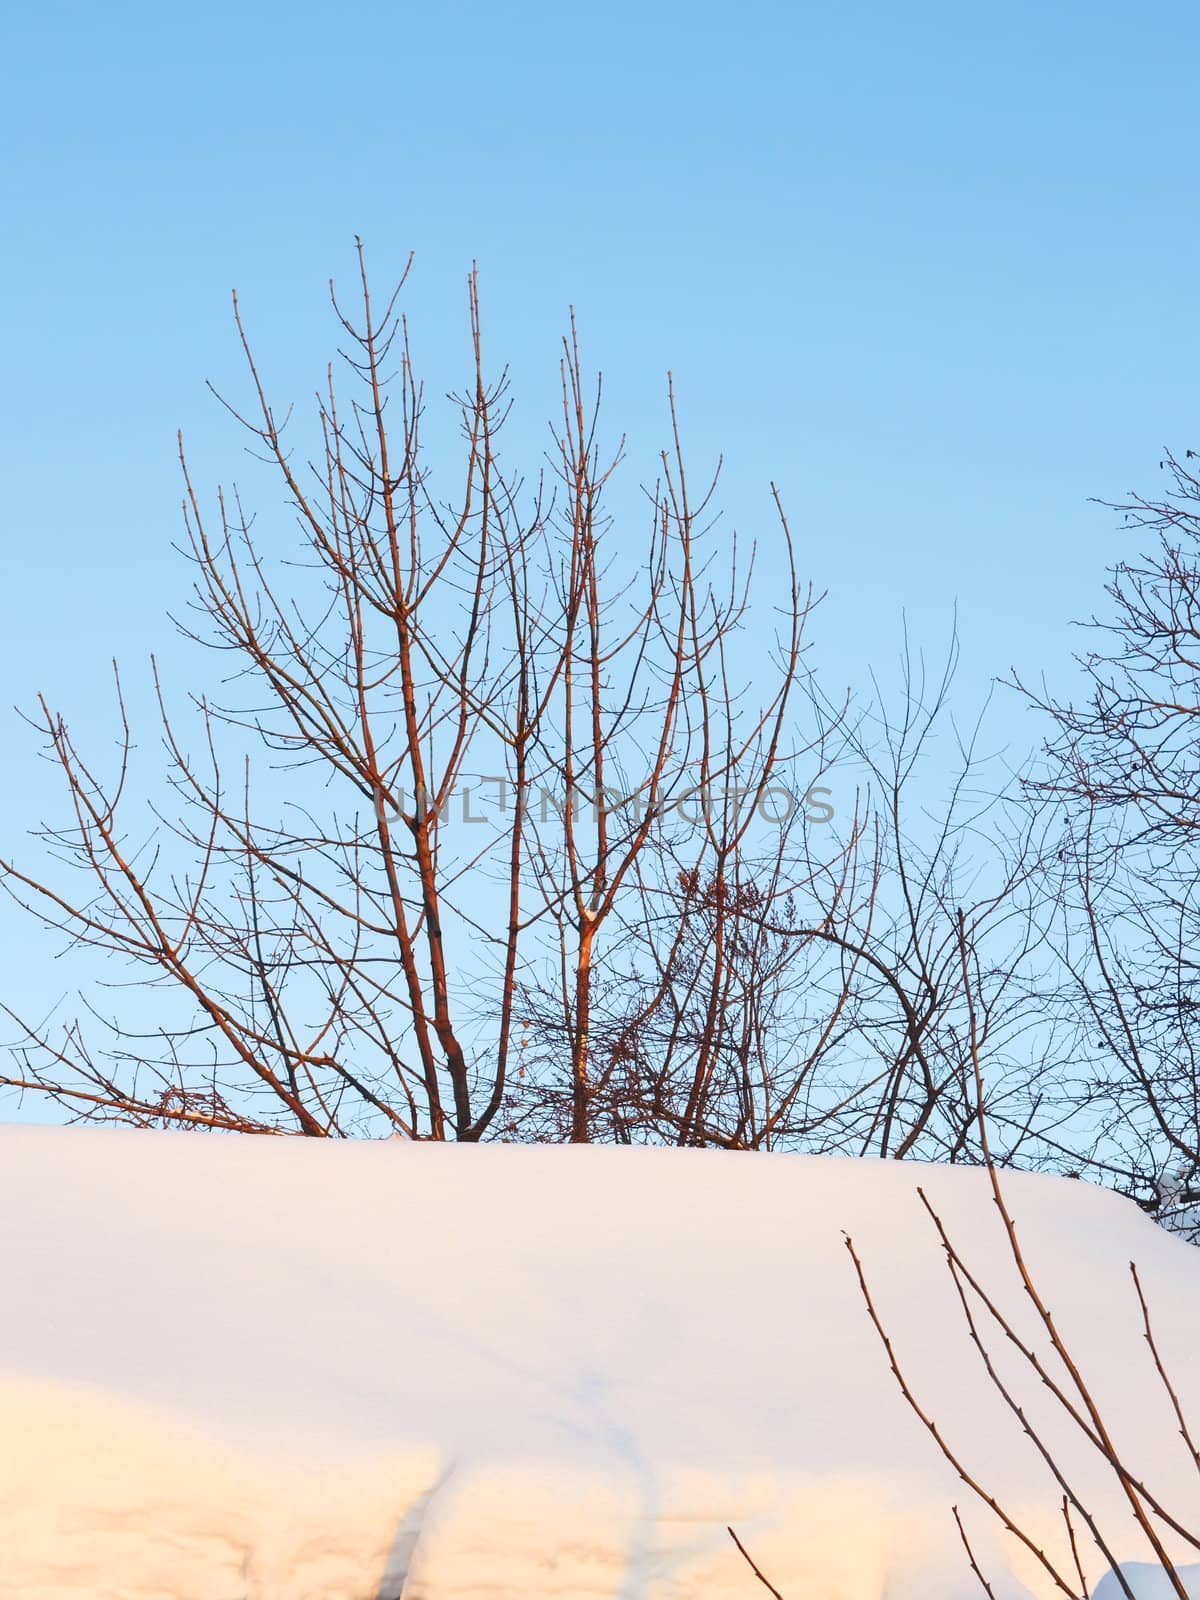 Trees among the snow drifts in the beams of the setting sun